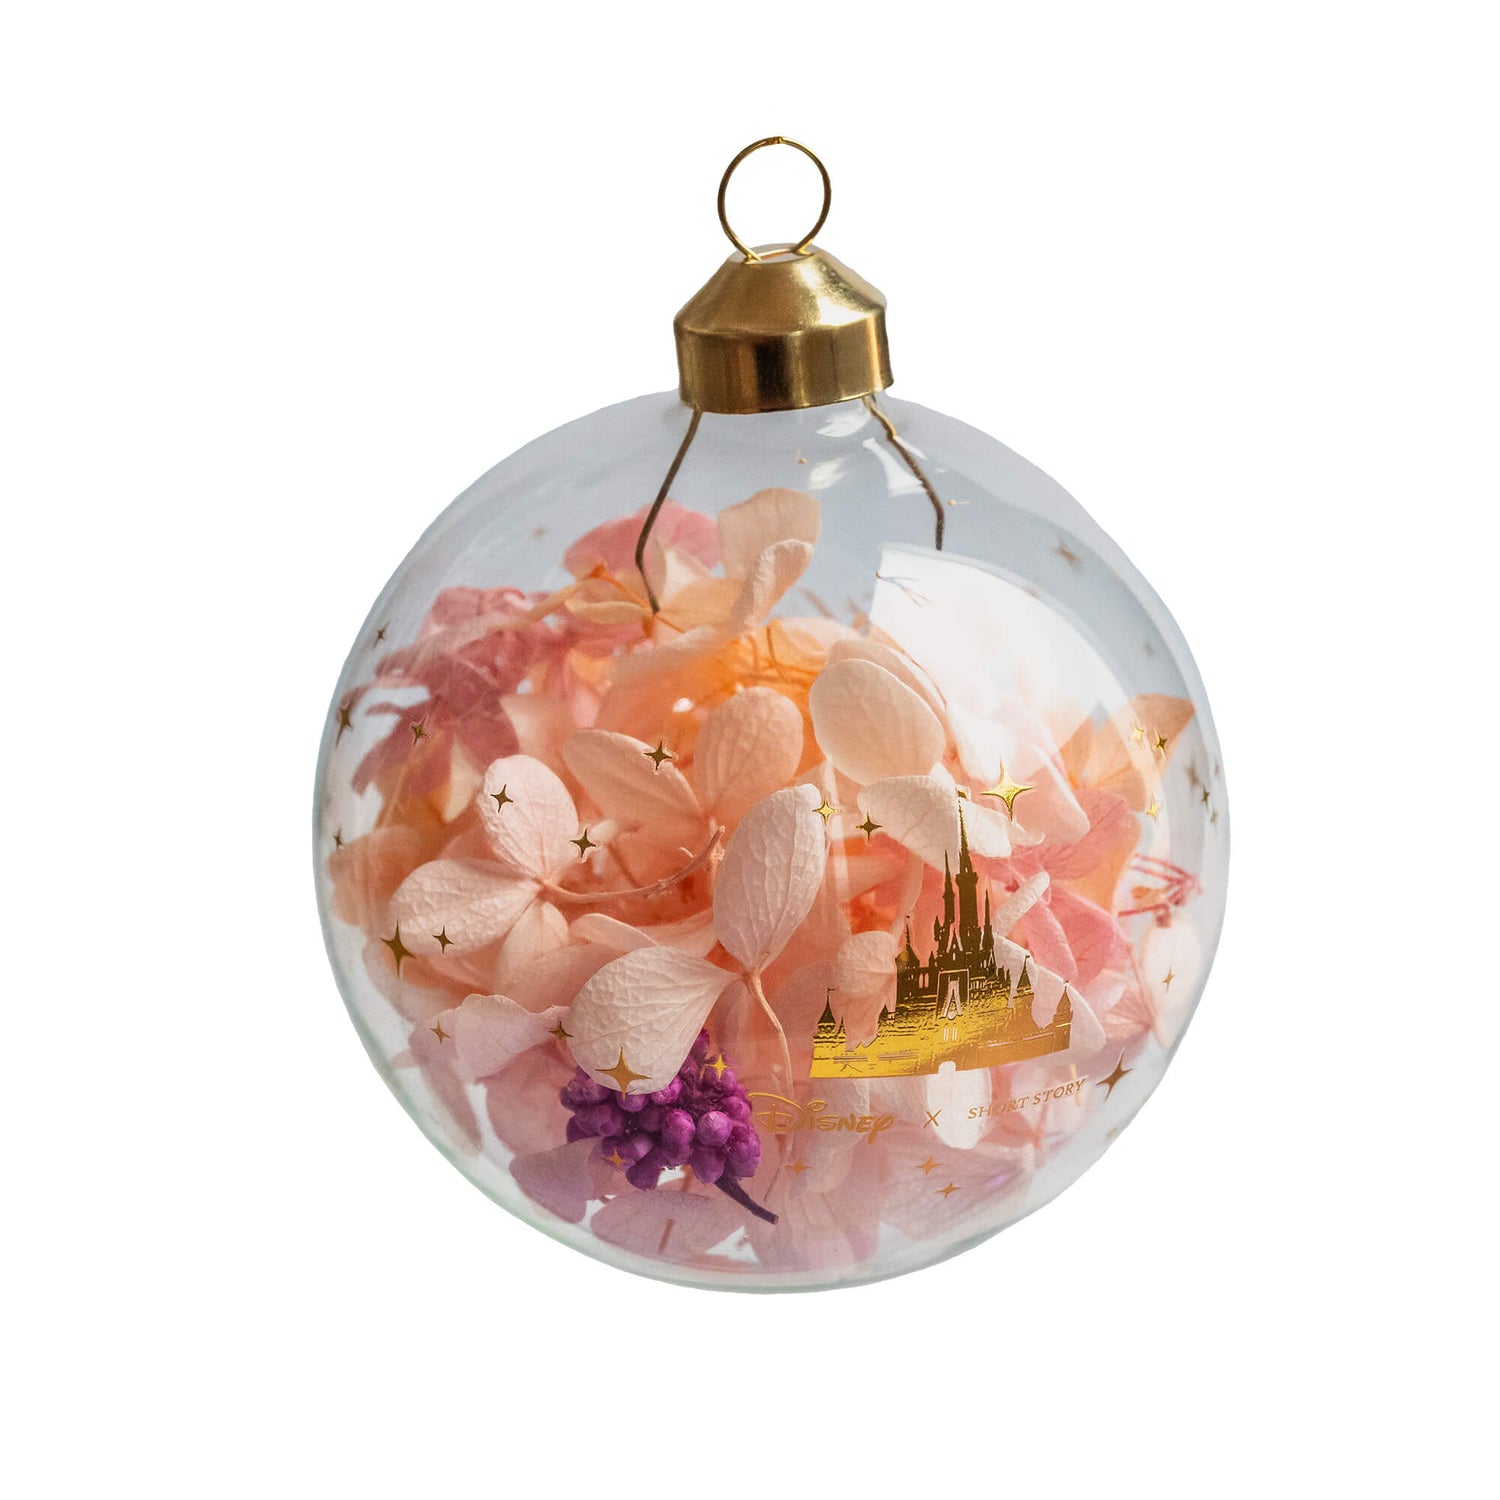 Disney Glass Bauble Happily Ever After